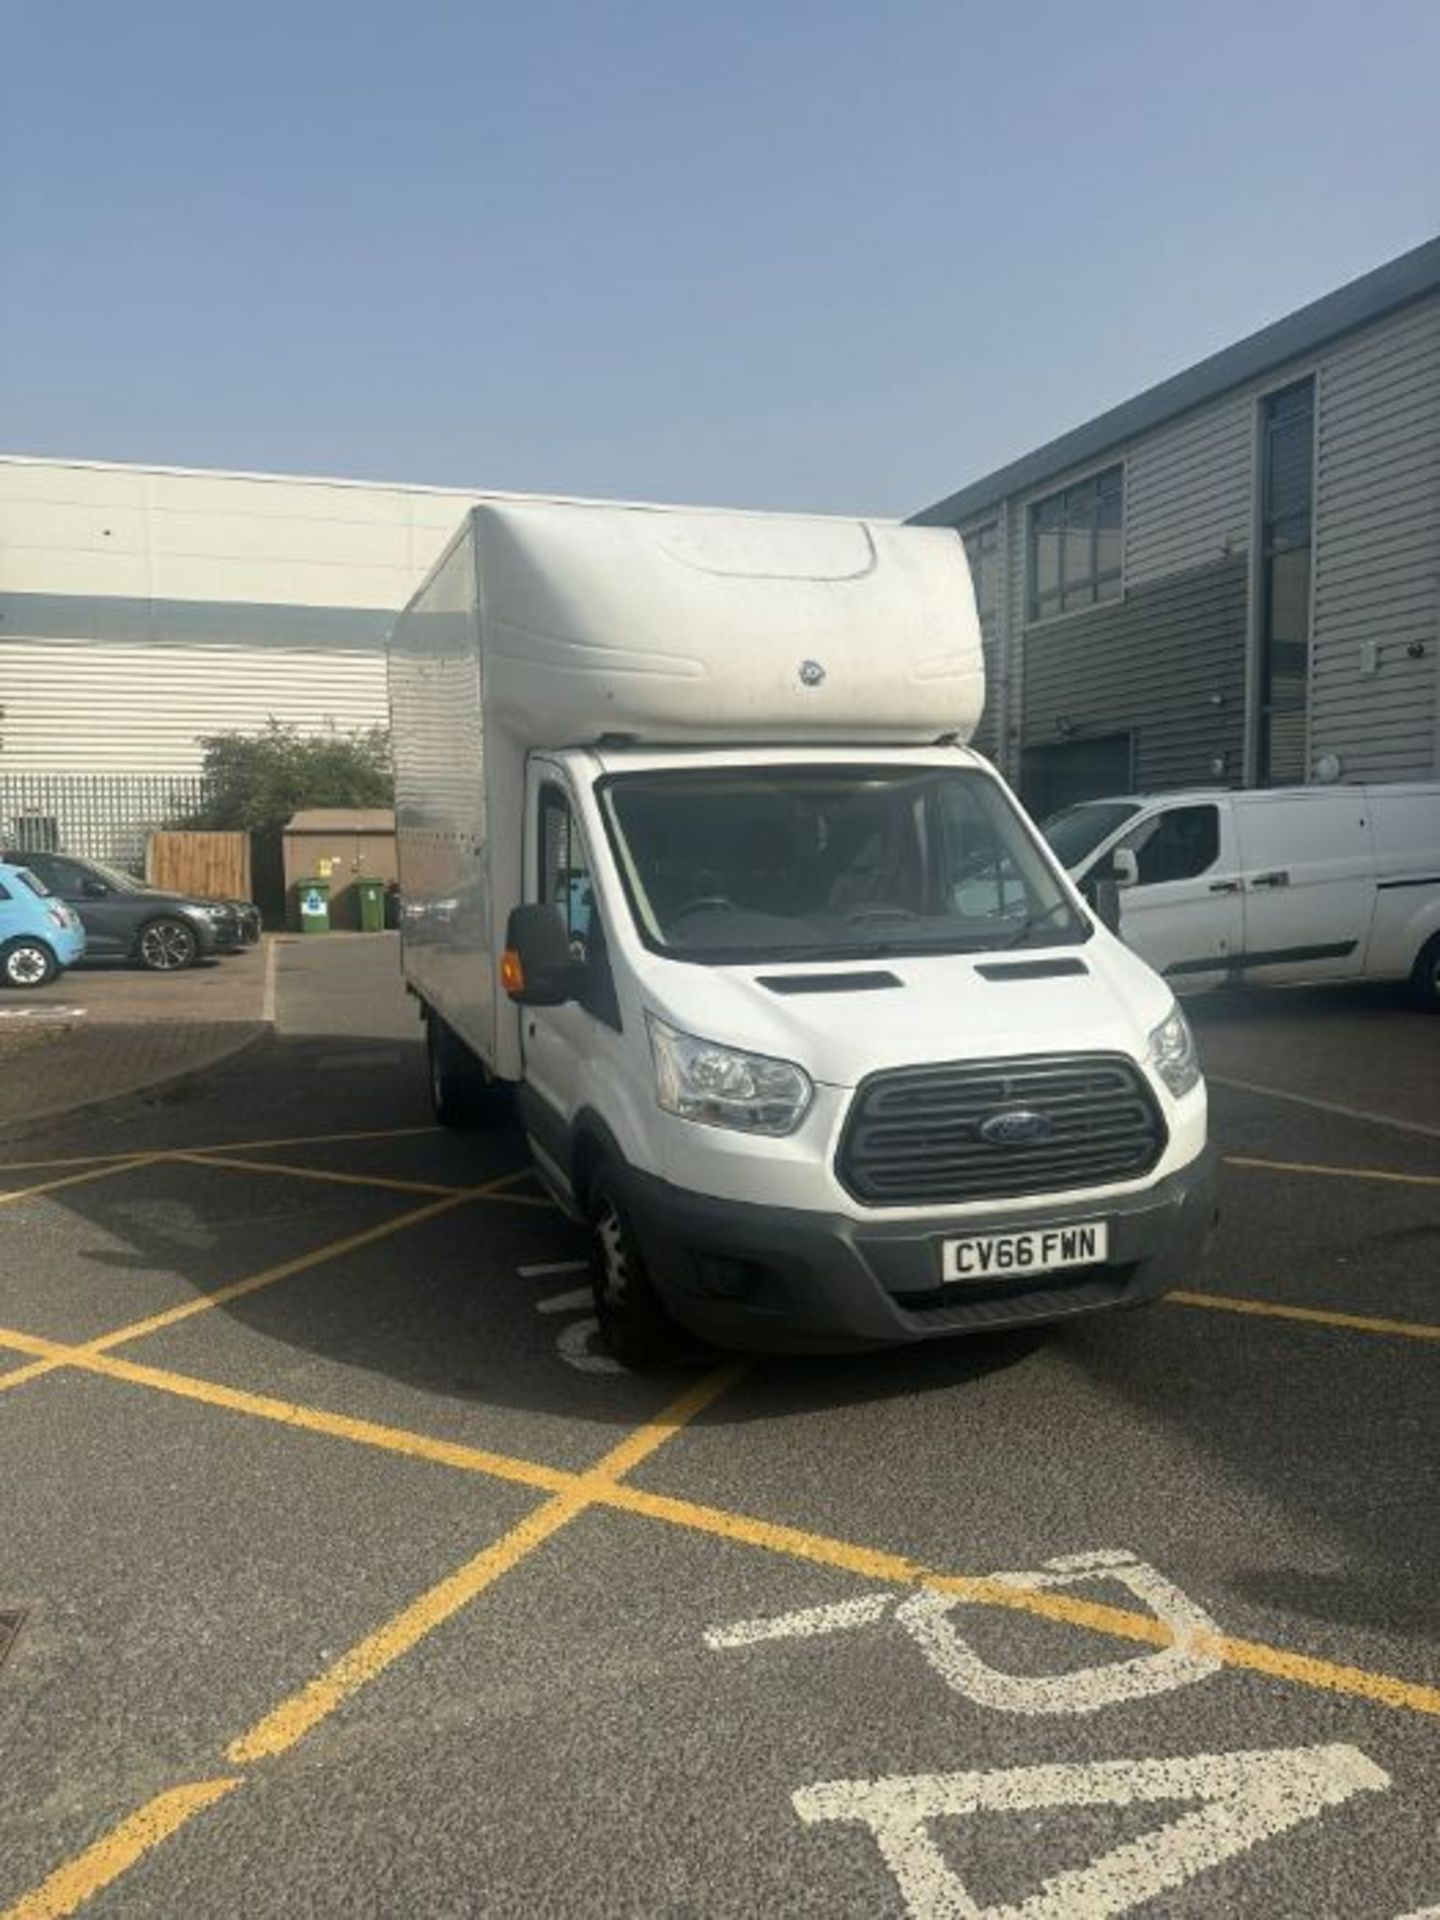 2016 FORD TRANSIT BOX VAN WITH TAIL LIFT